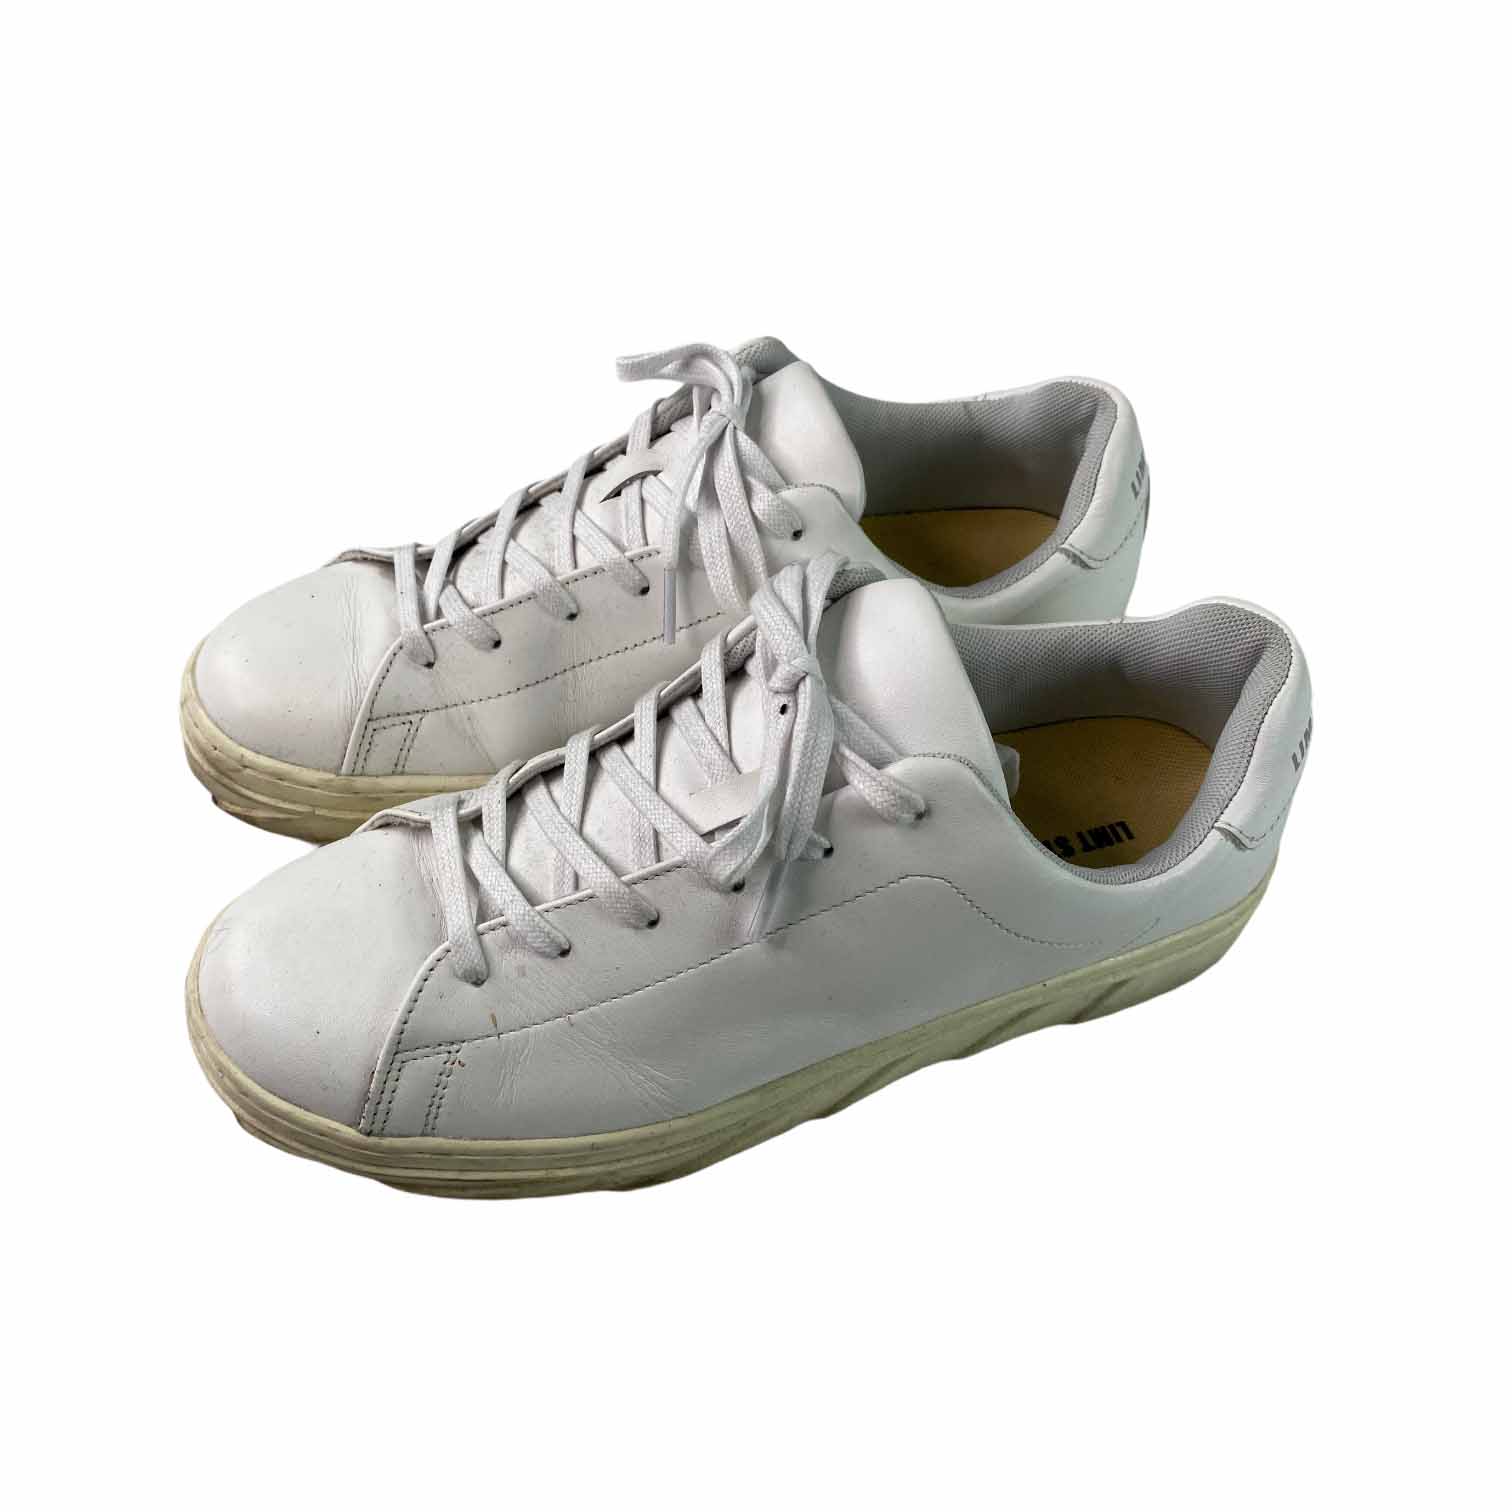 [LIMT STUDIOS] Auskin Leather Sneakers WH - Size 270